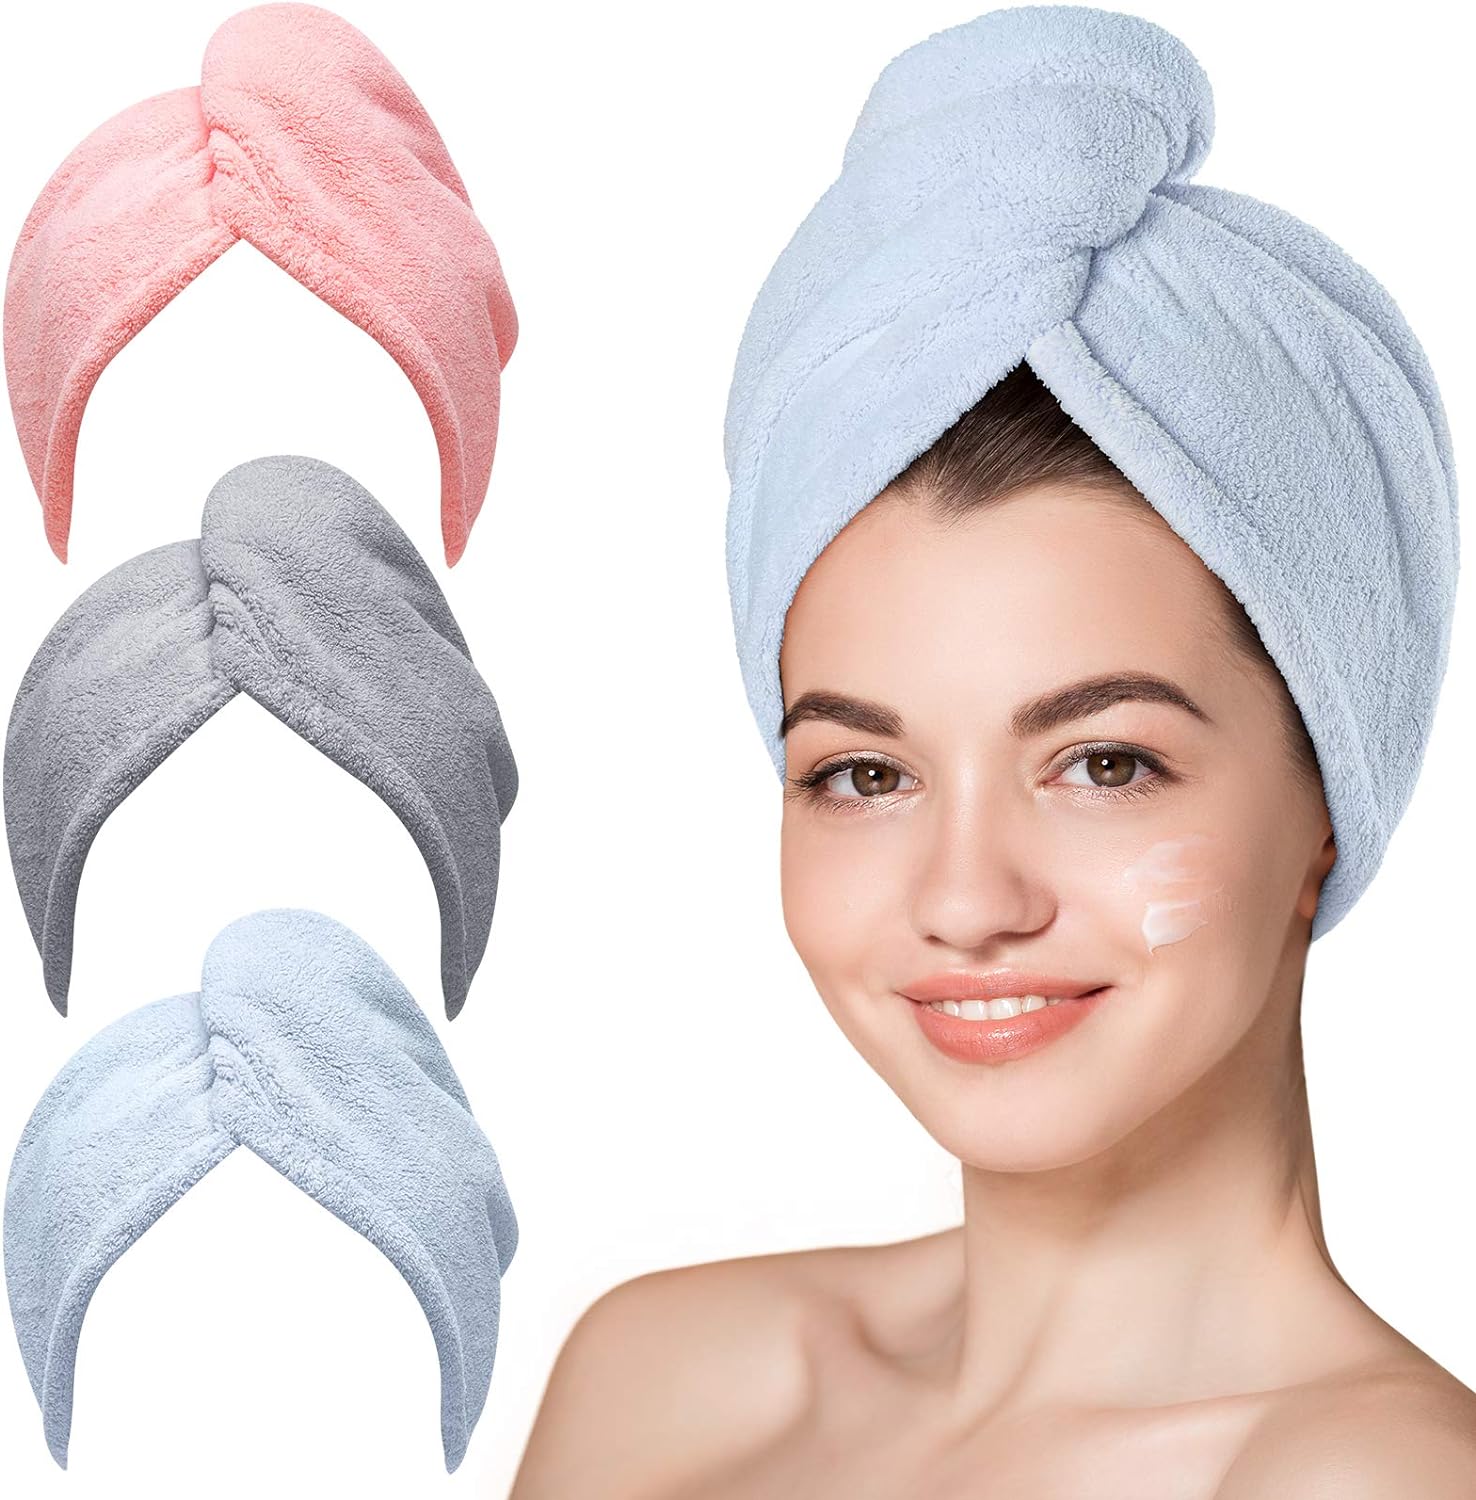 I was a little scared to buy these towels online without feeling them especially with the vacuum packaging. Im so glad I took a chance! These wash up great, are very fluffy & have cut the drying time for my daughters waist length thick hair in half. I have fine hair and these dry it in under a half hour. Great quality, have used for over a month now and they still look new.